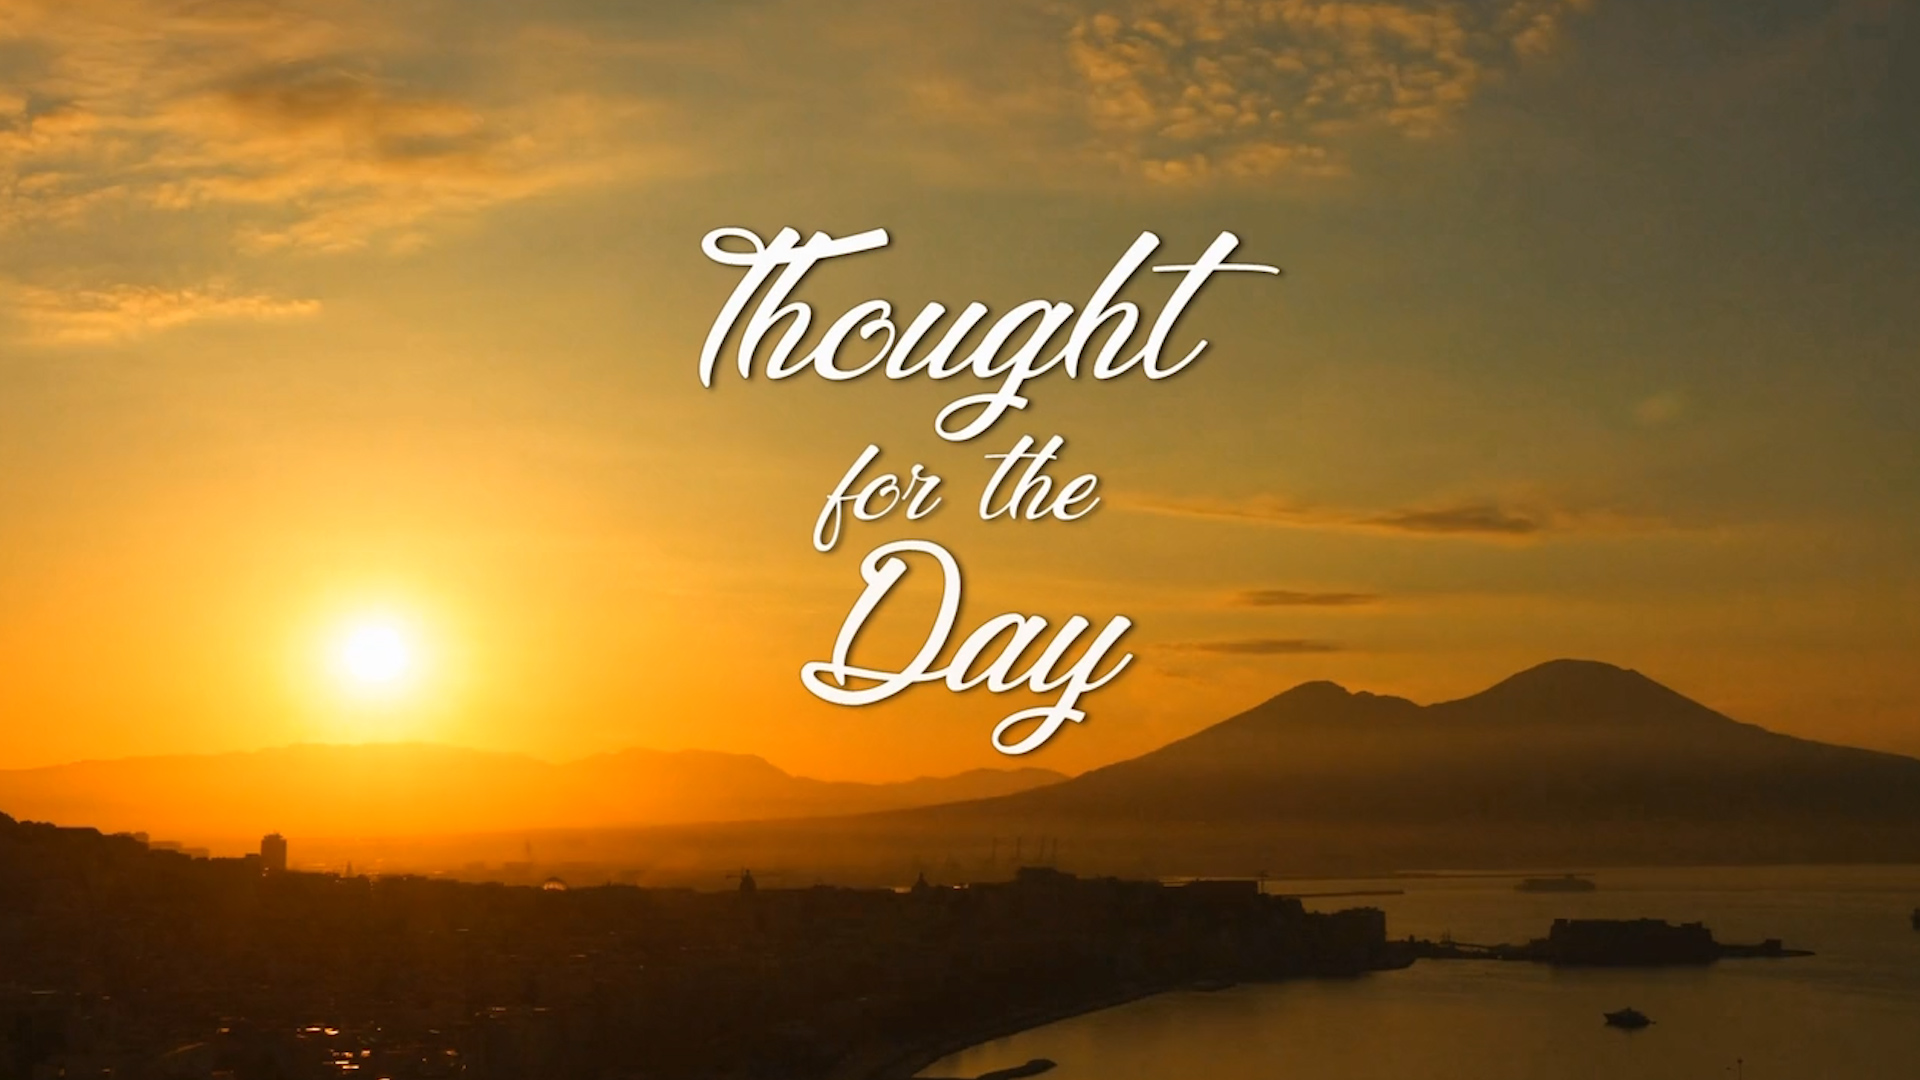 Screenshot of online video "Thought for the Day"0